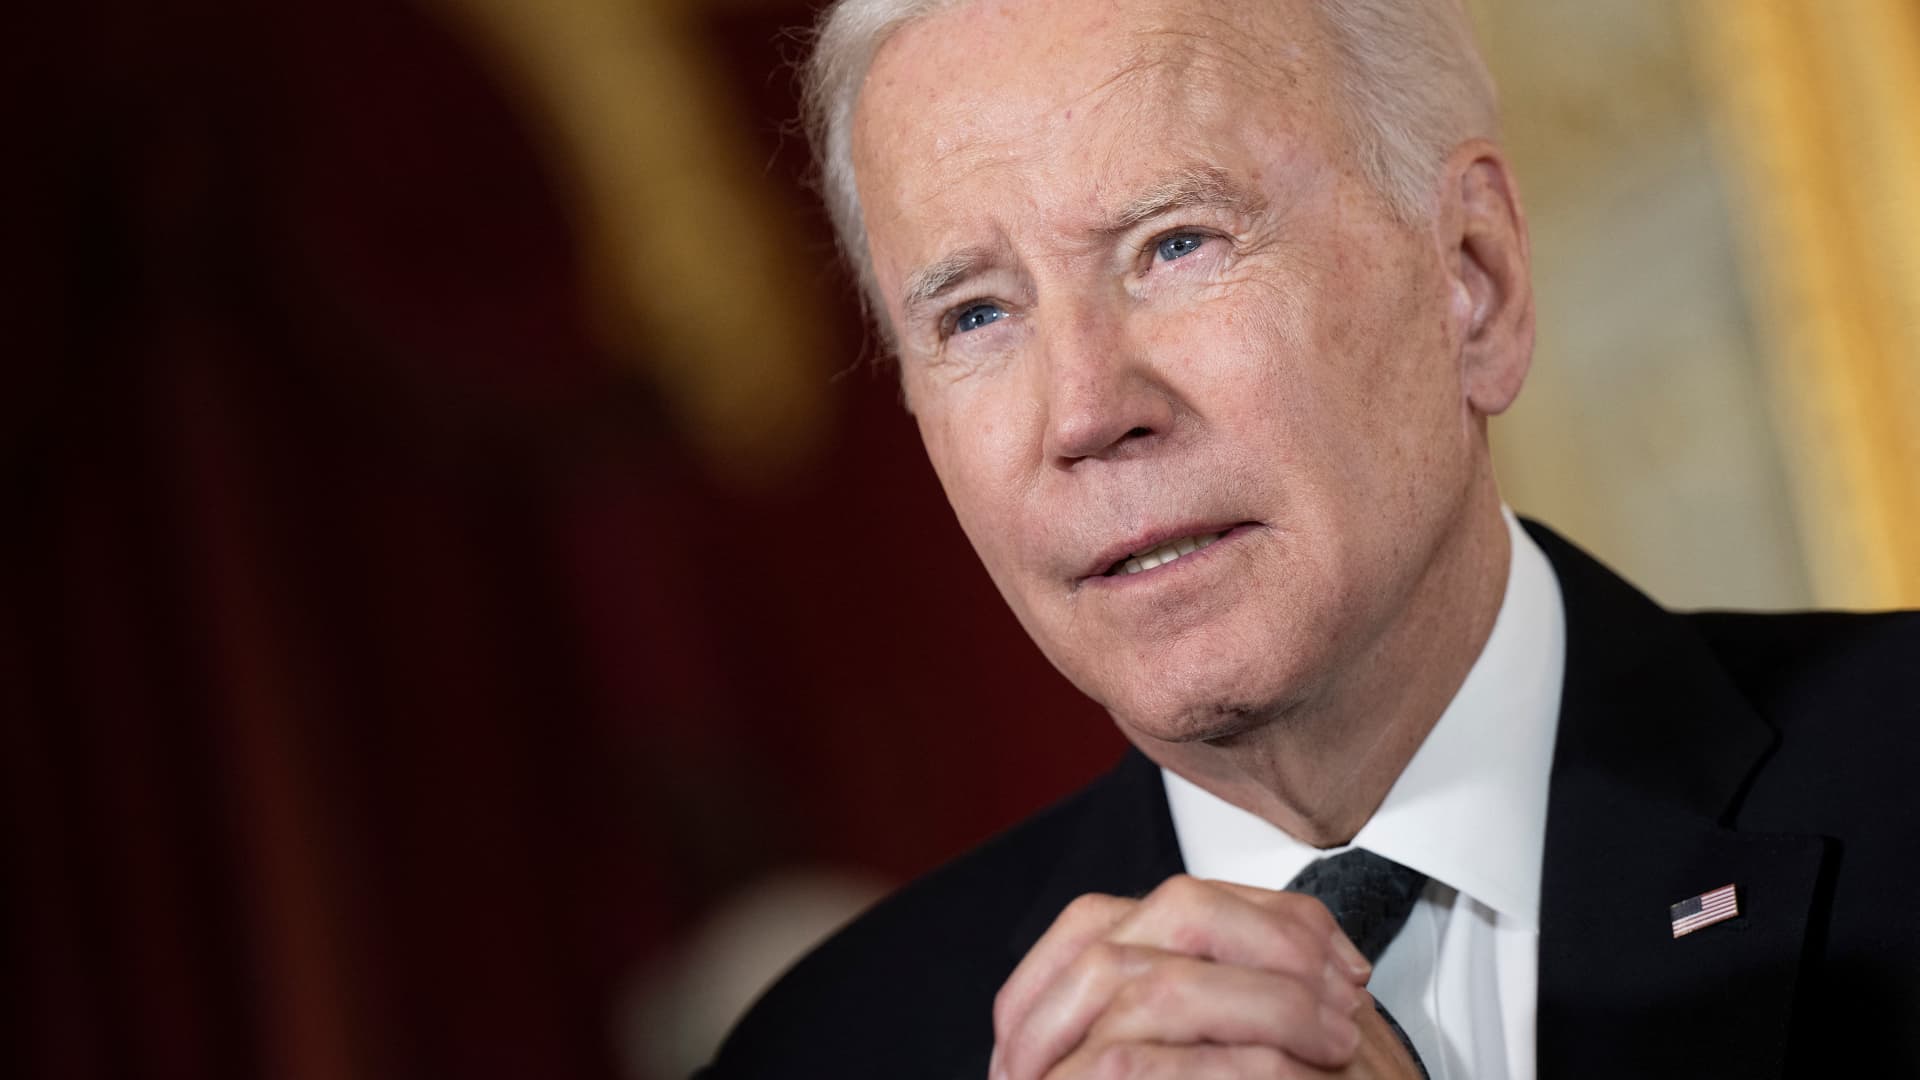 Biden says US forces will defend Taiwan in case of Chinese aggression